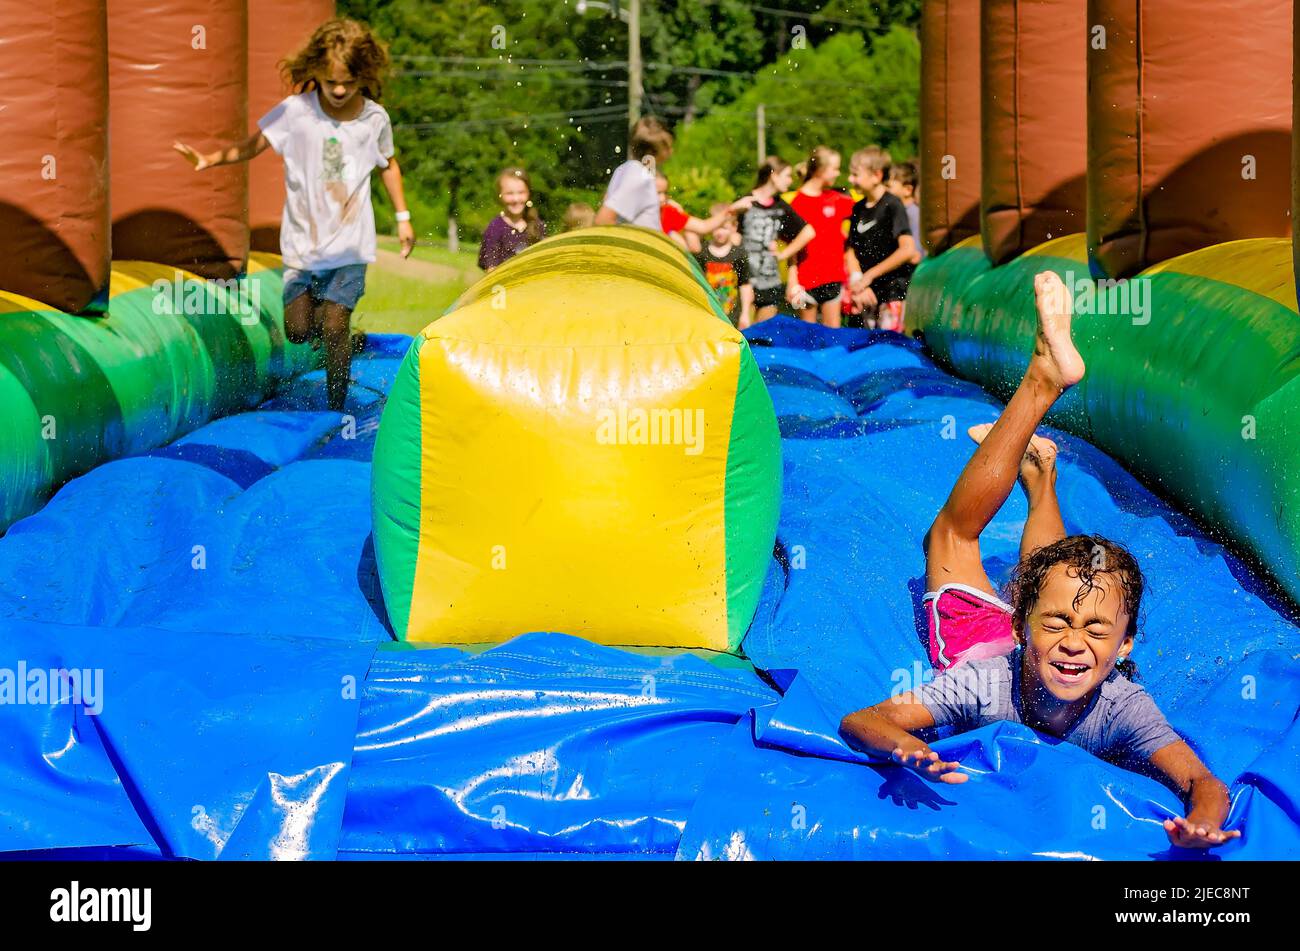 Children play on an inflatable water slide, July 27, 2012, in Columbus, Mississippi. Stock Photo